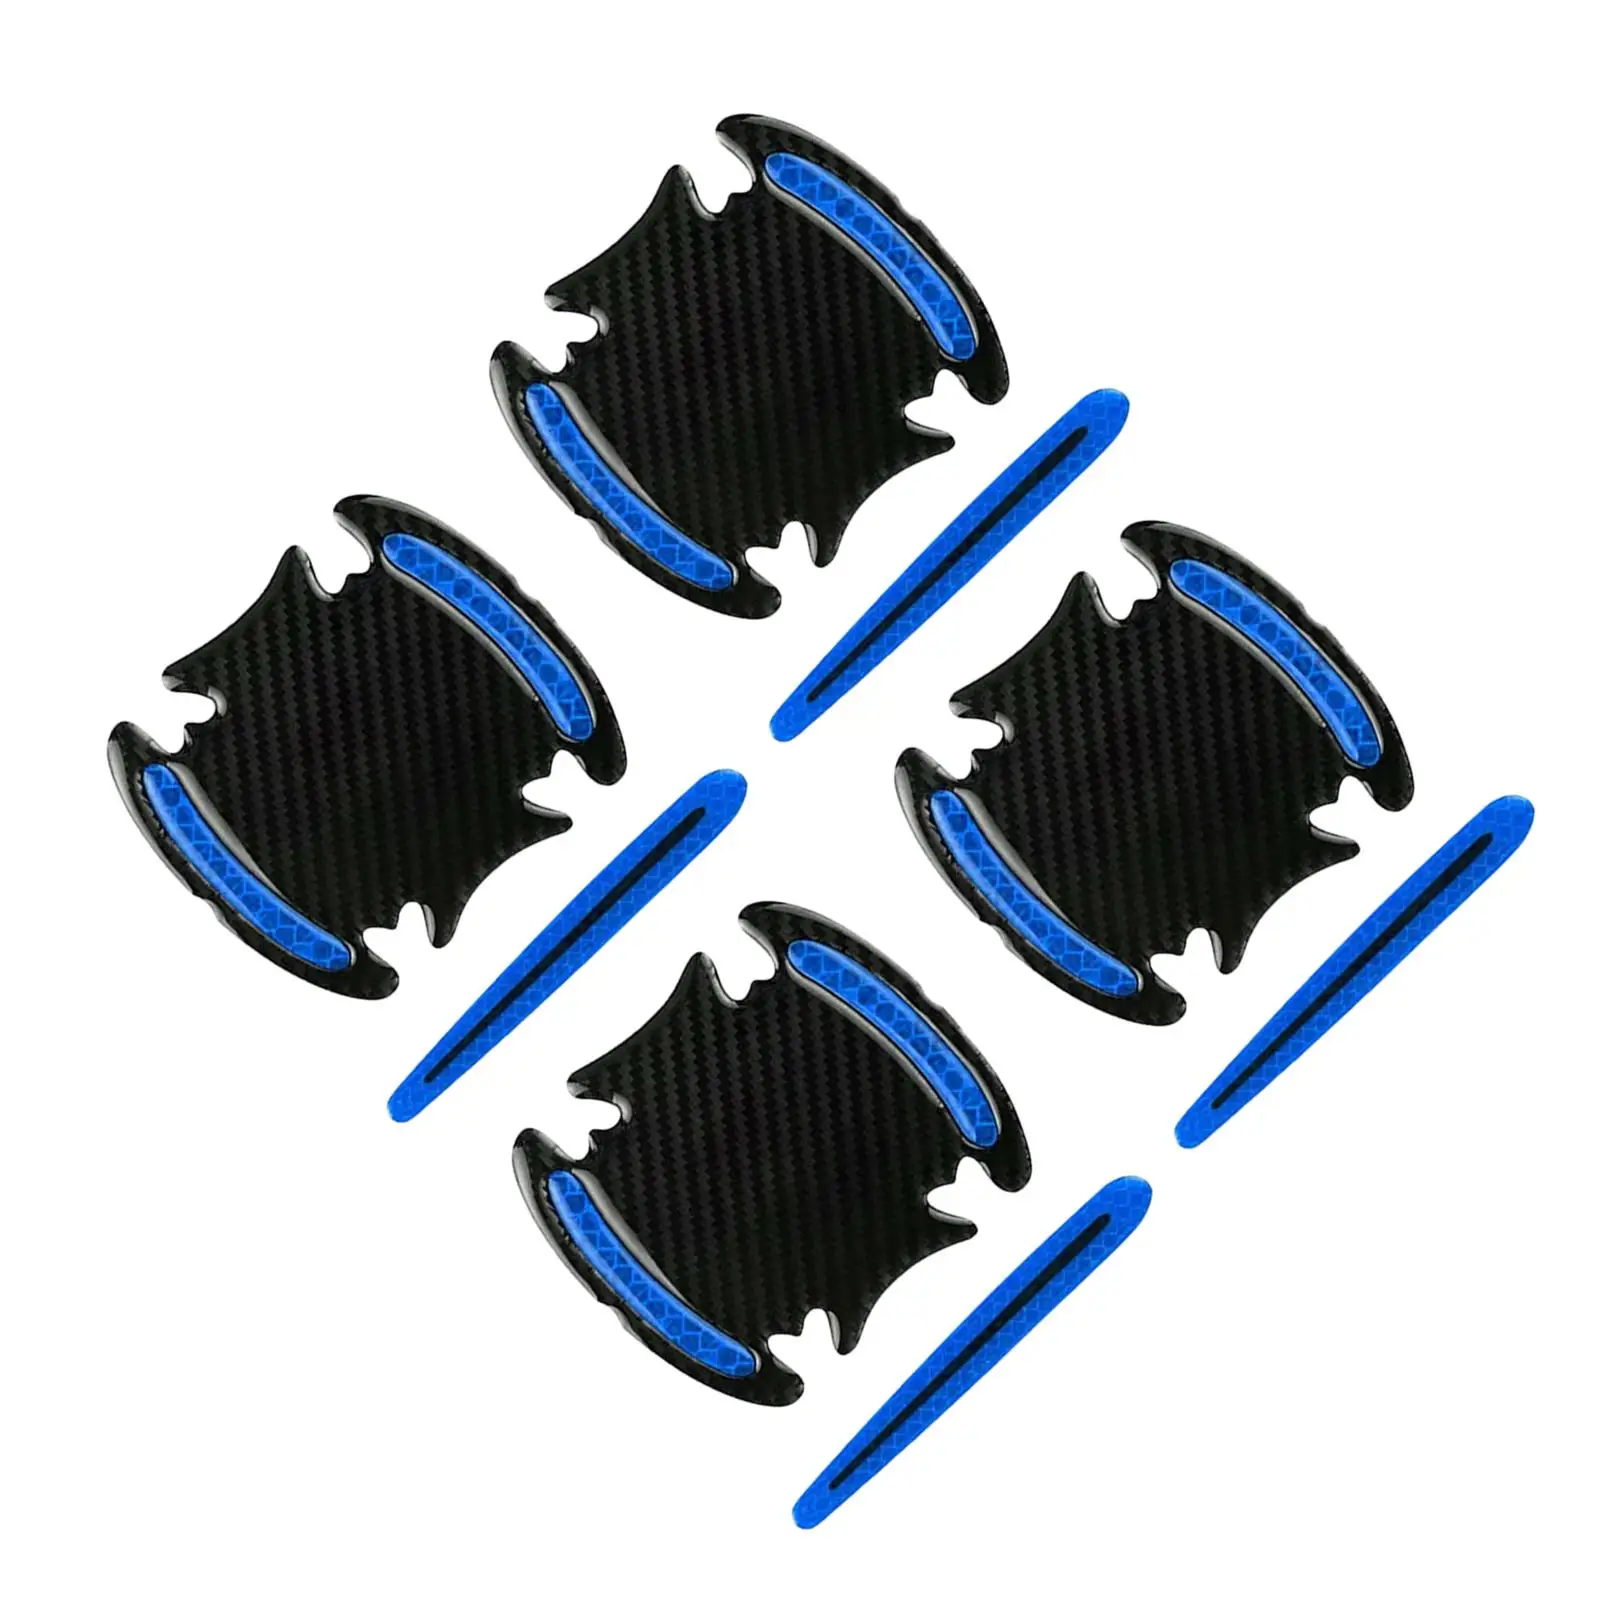 8 Pieces Universal Car Door Handle Scratch Protector Reflective Strips Stickers Covers Accessory Warning Marker Protective Films